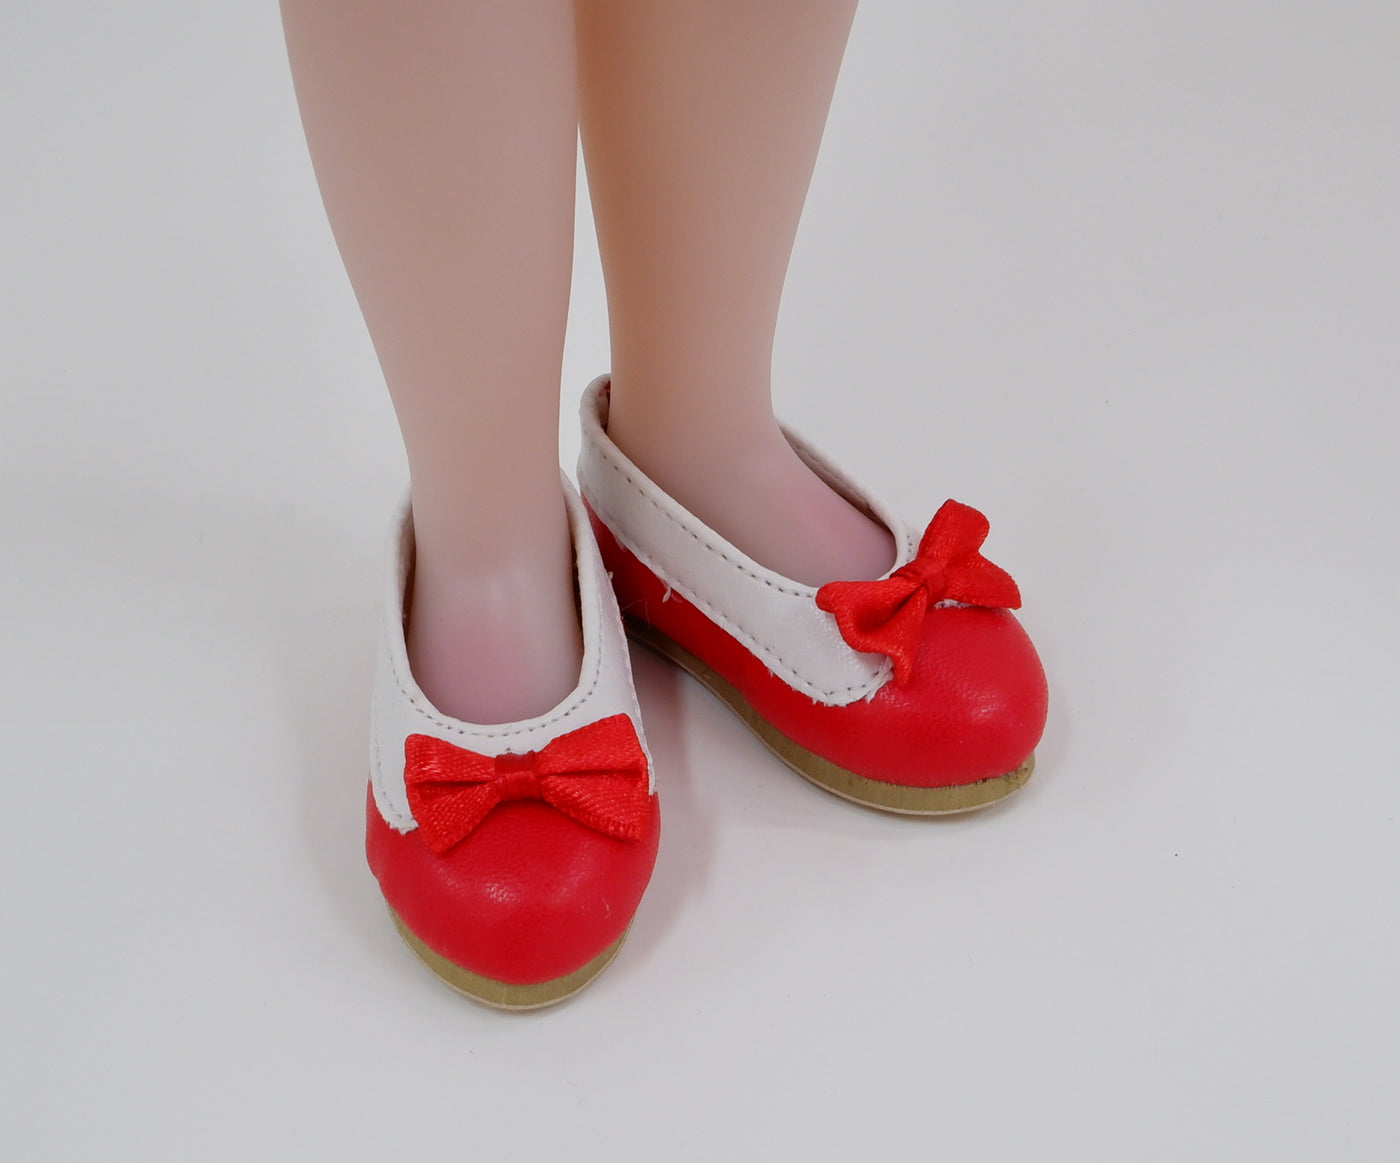 Collared Ballet Flats - Red & White